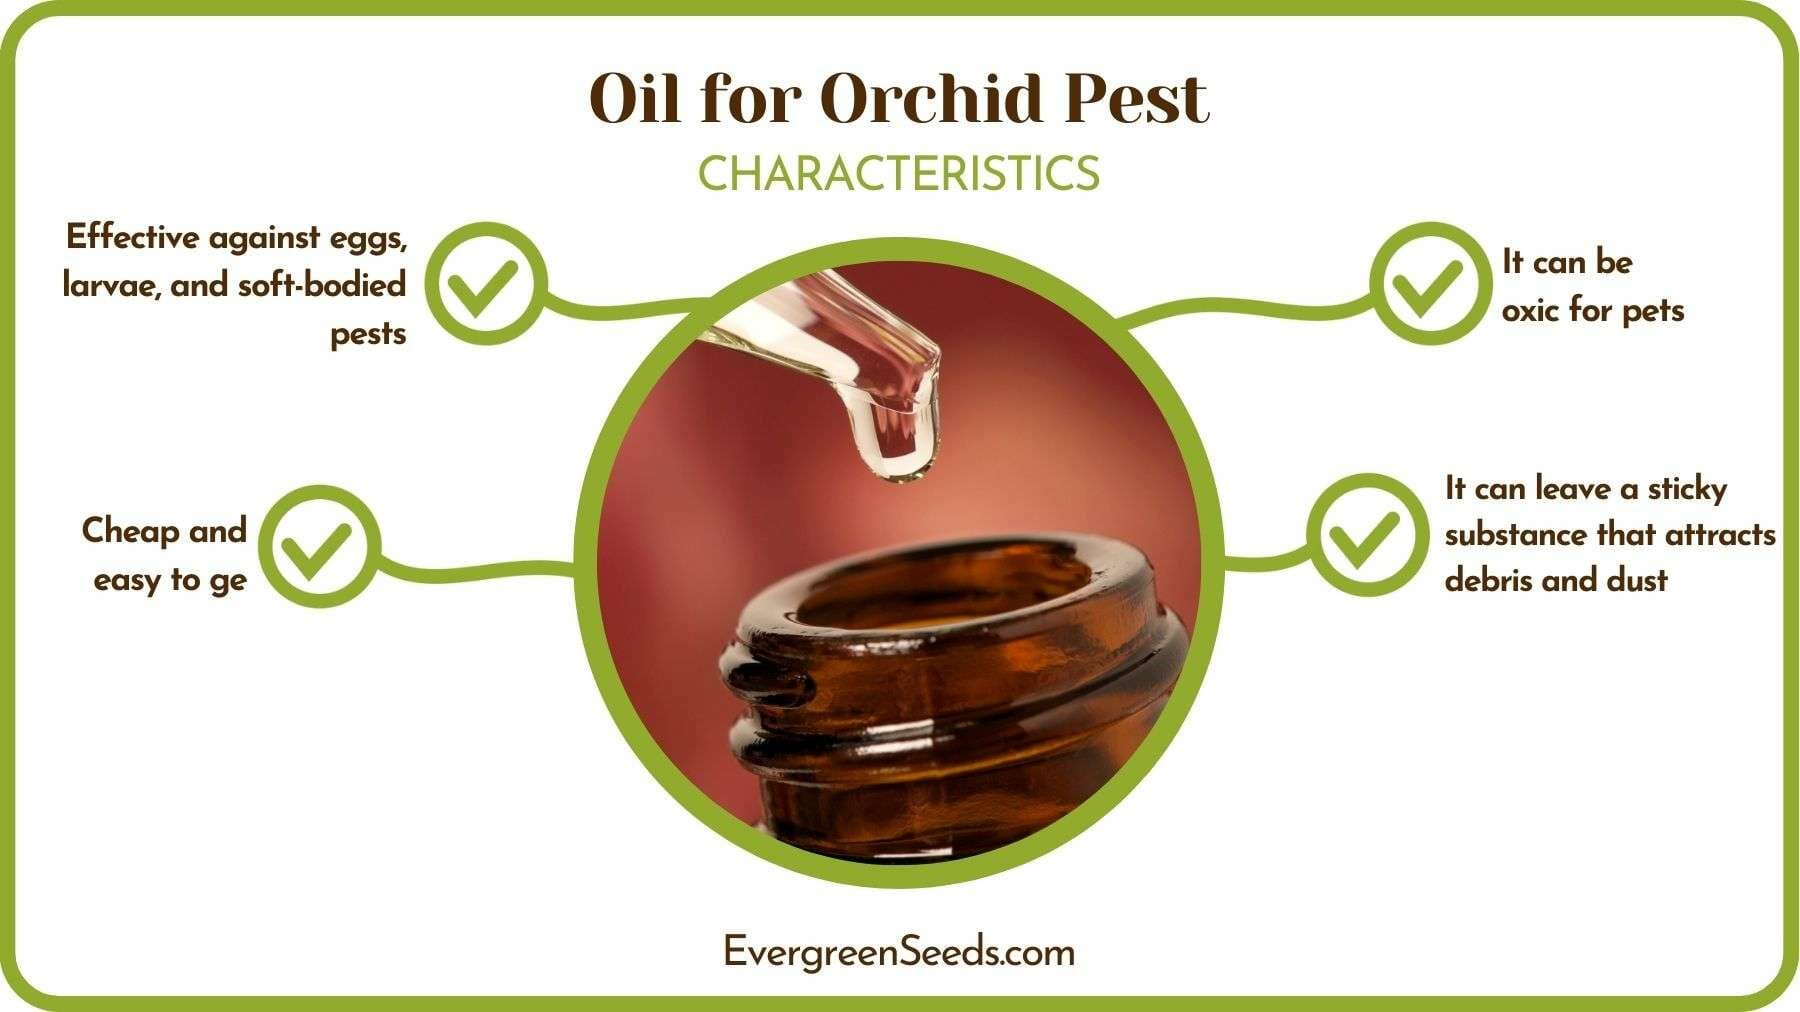 Specifications of Oil for Orchid Pest